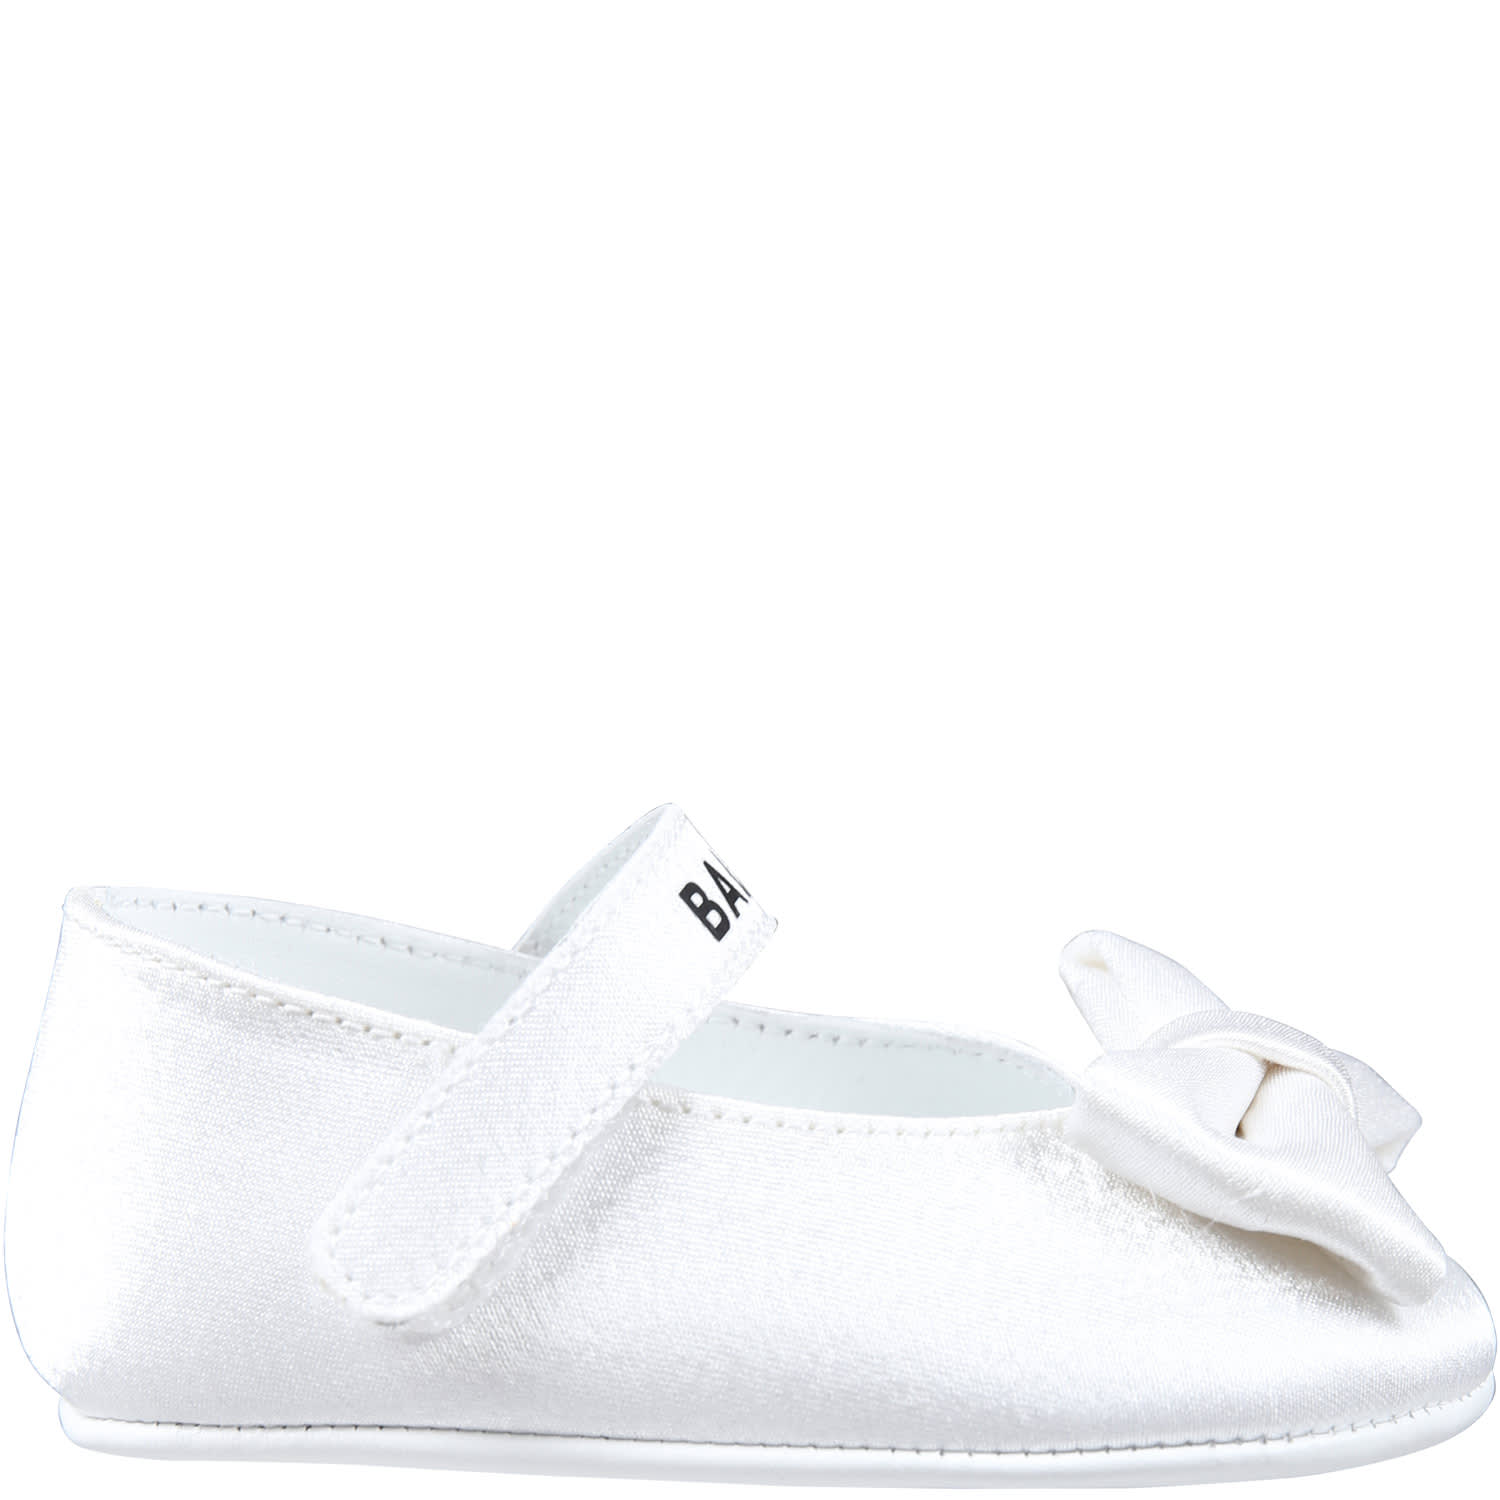 Shop Balmain White Shoes For Baby Girl With Logo And Bow